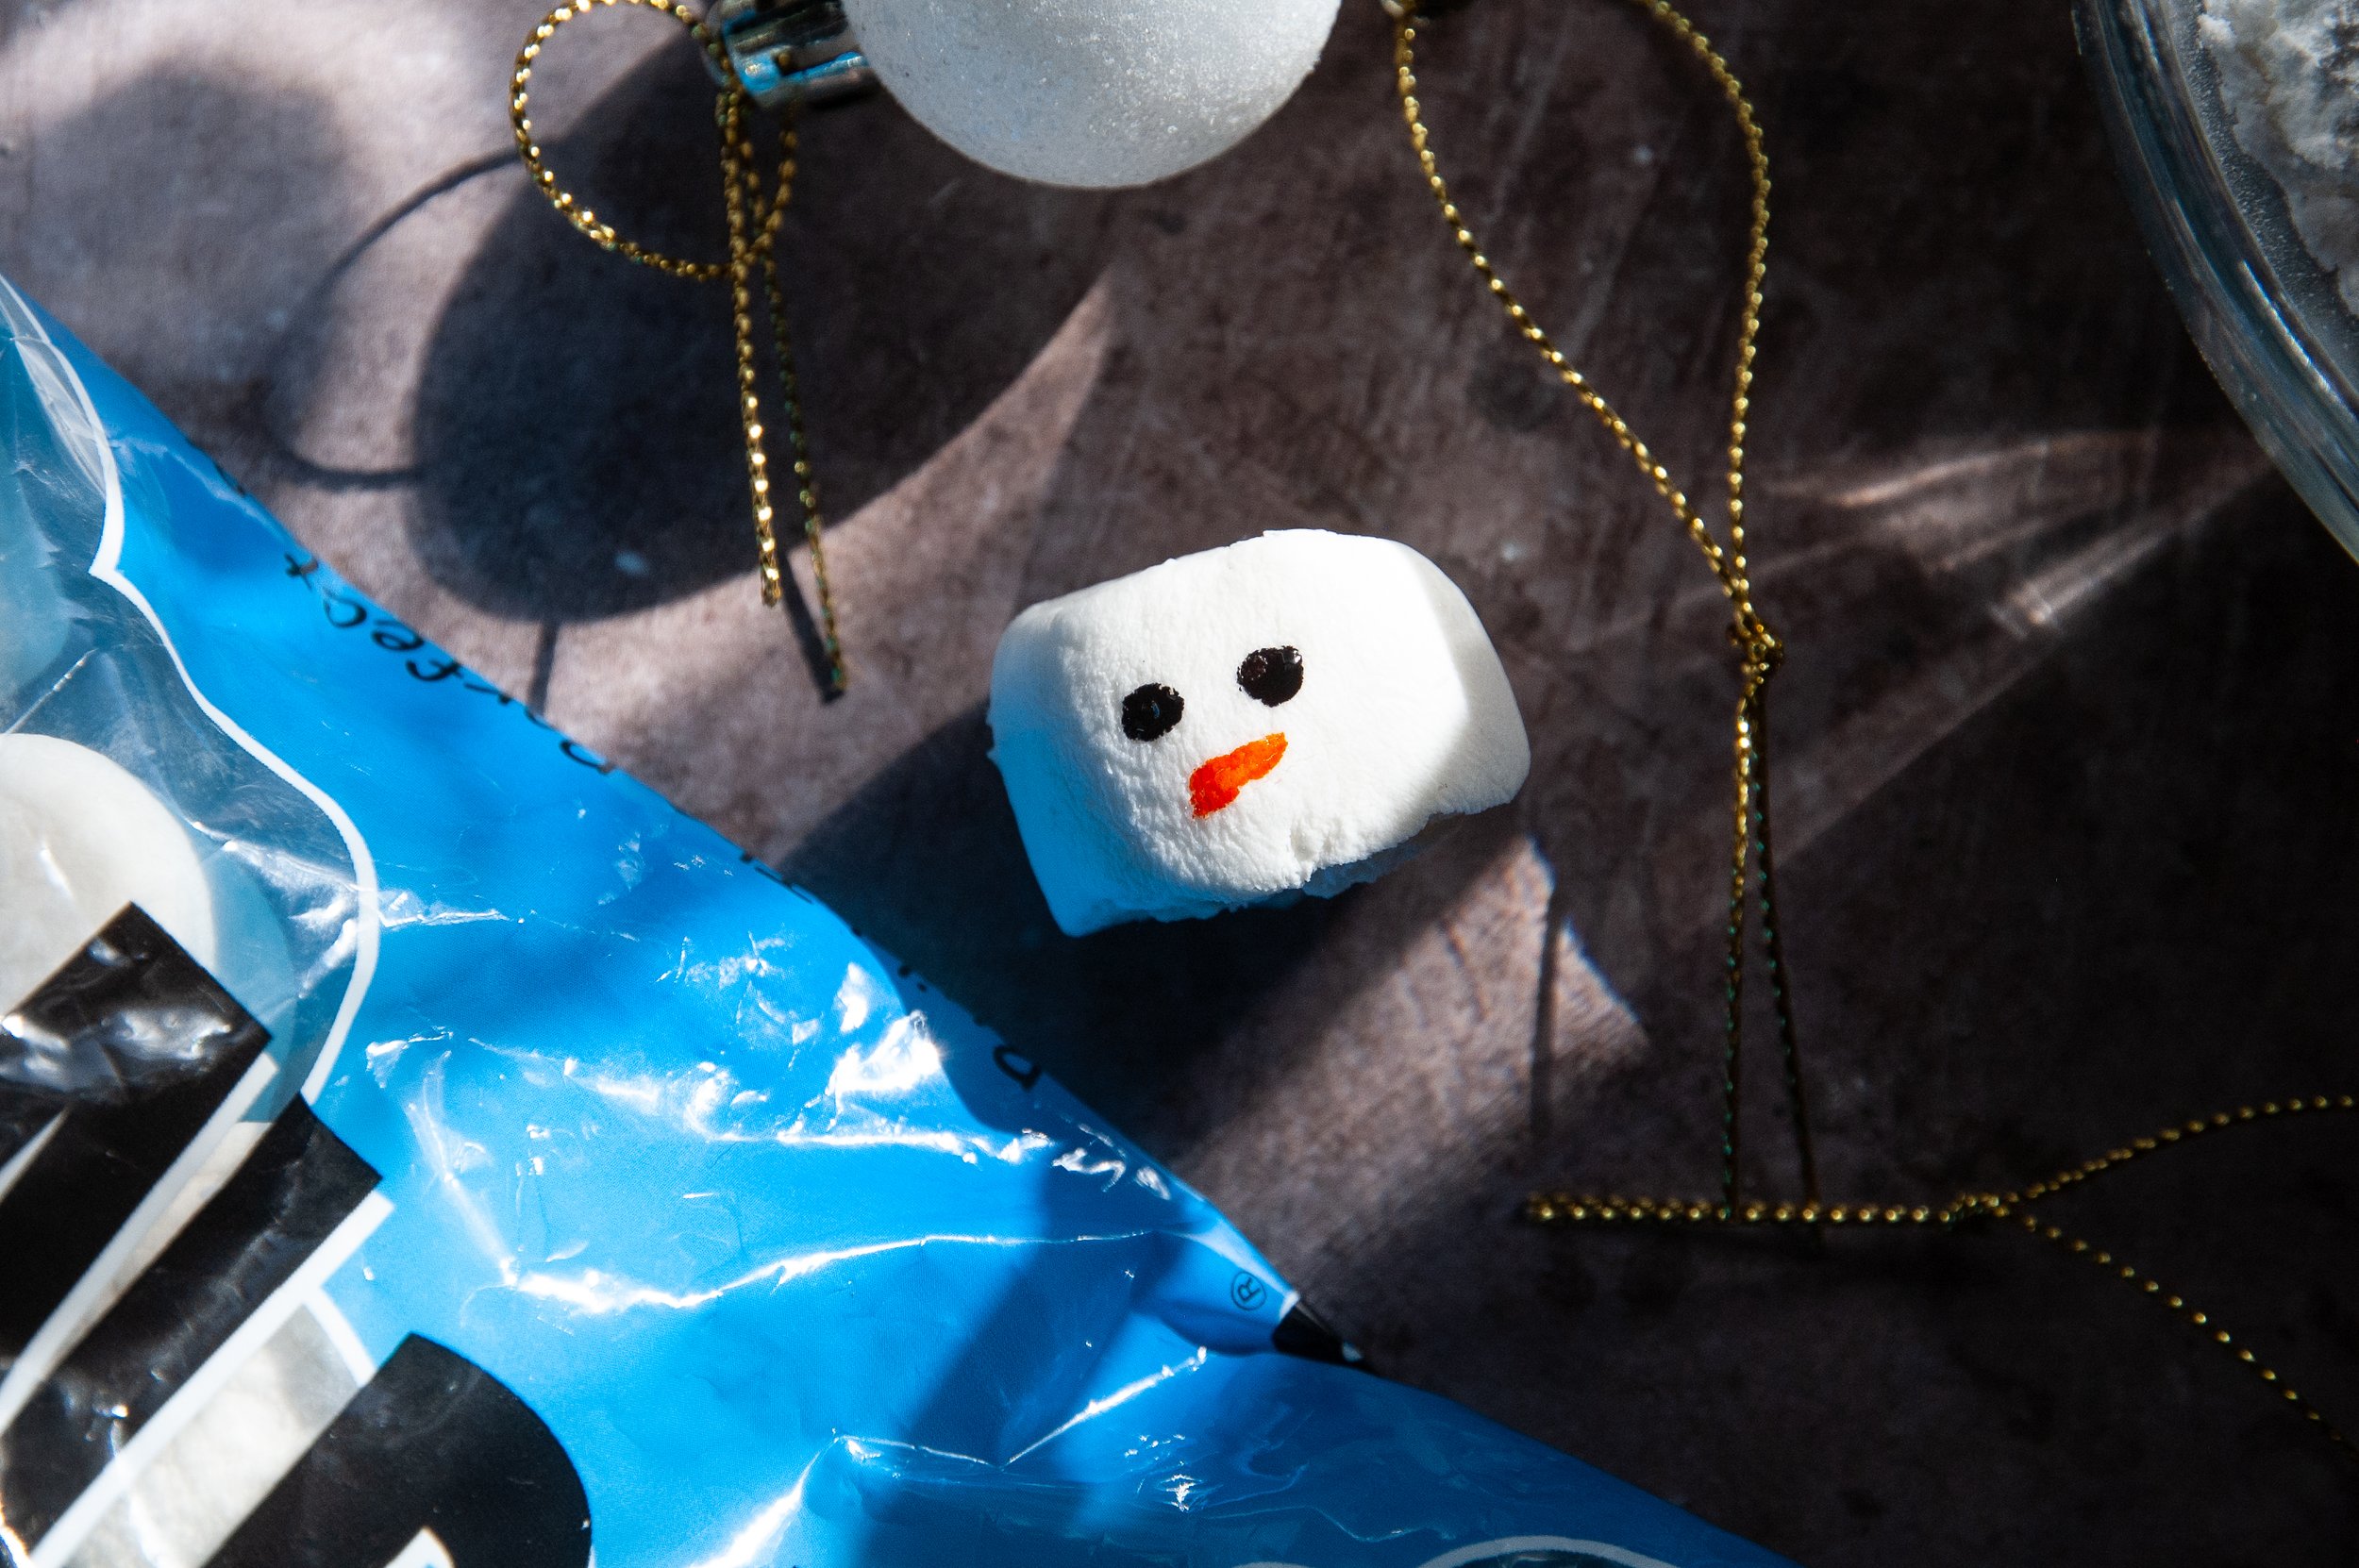 How to make Melted Snowman cookies